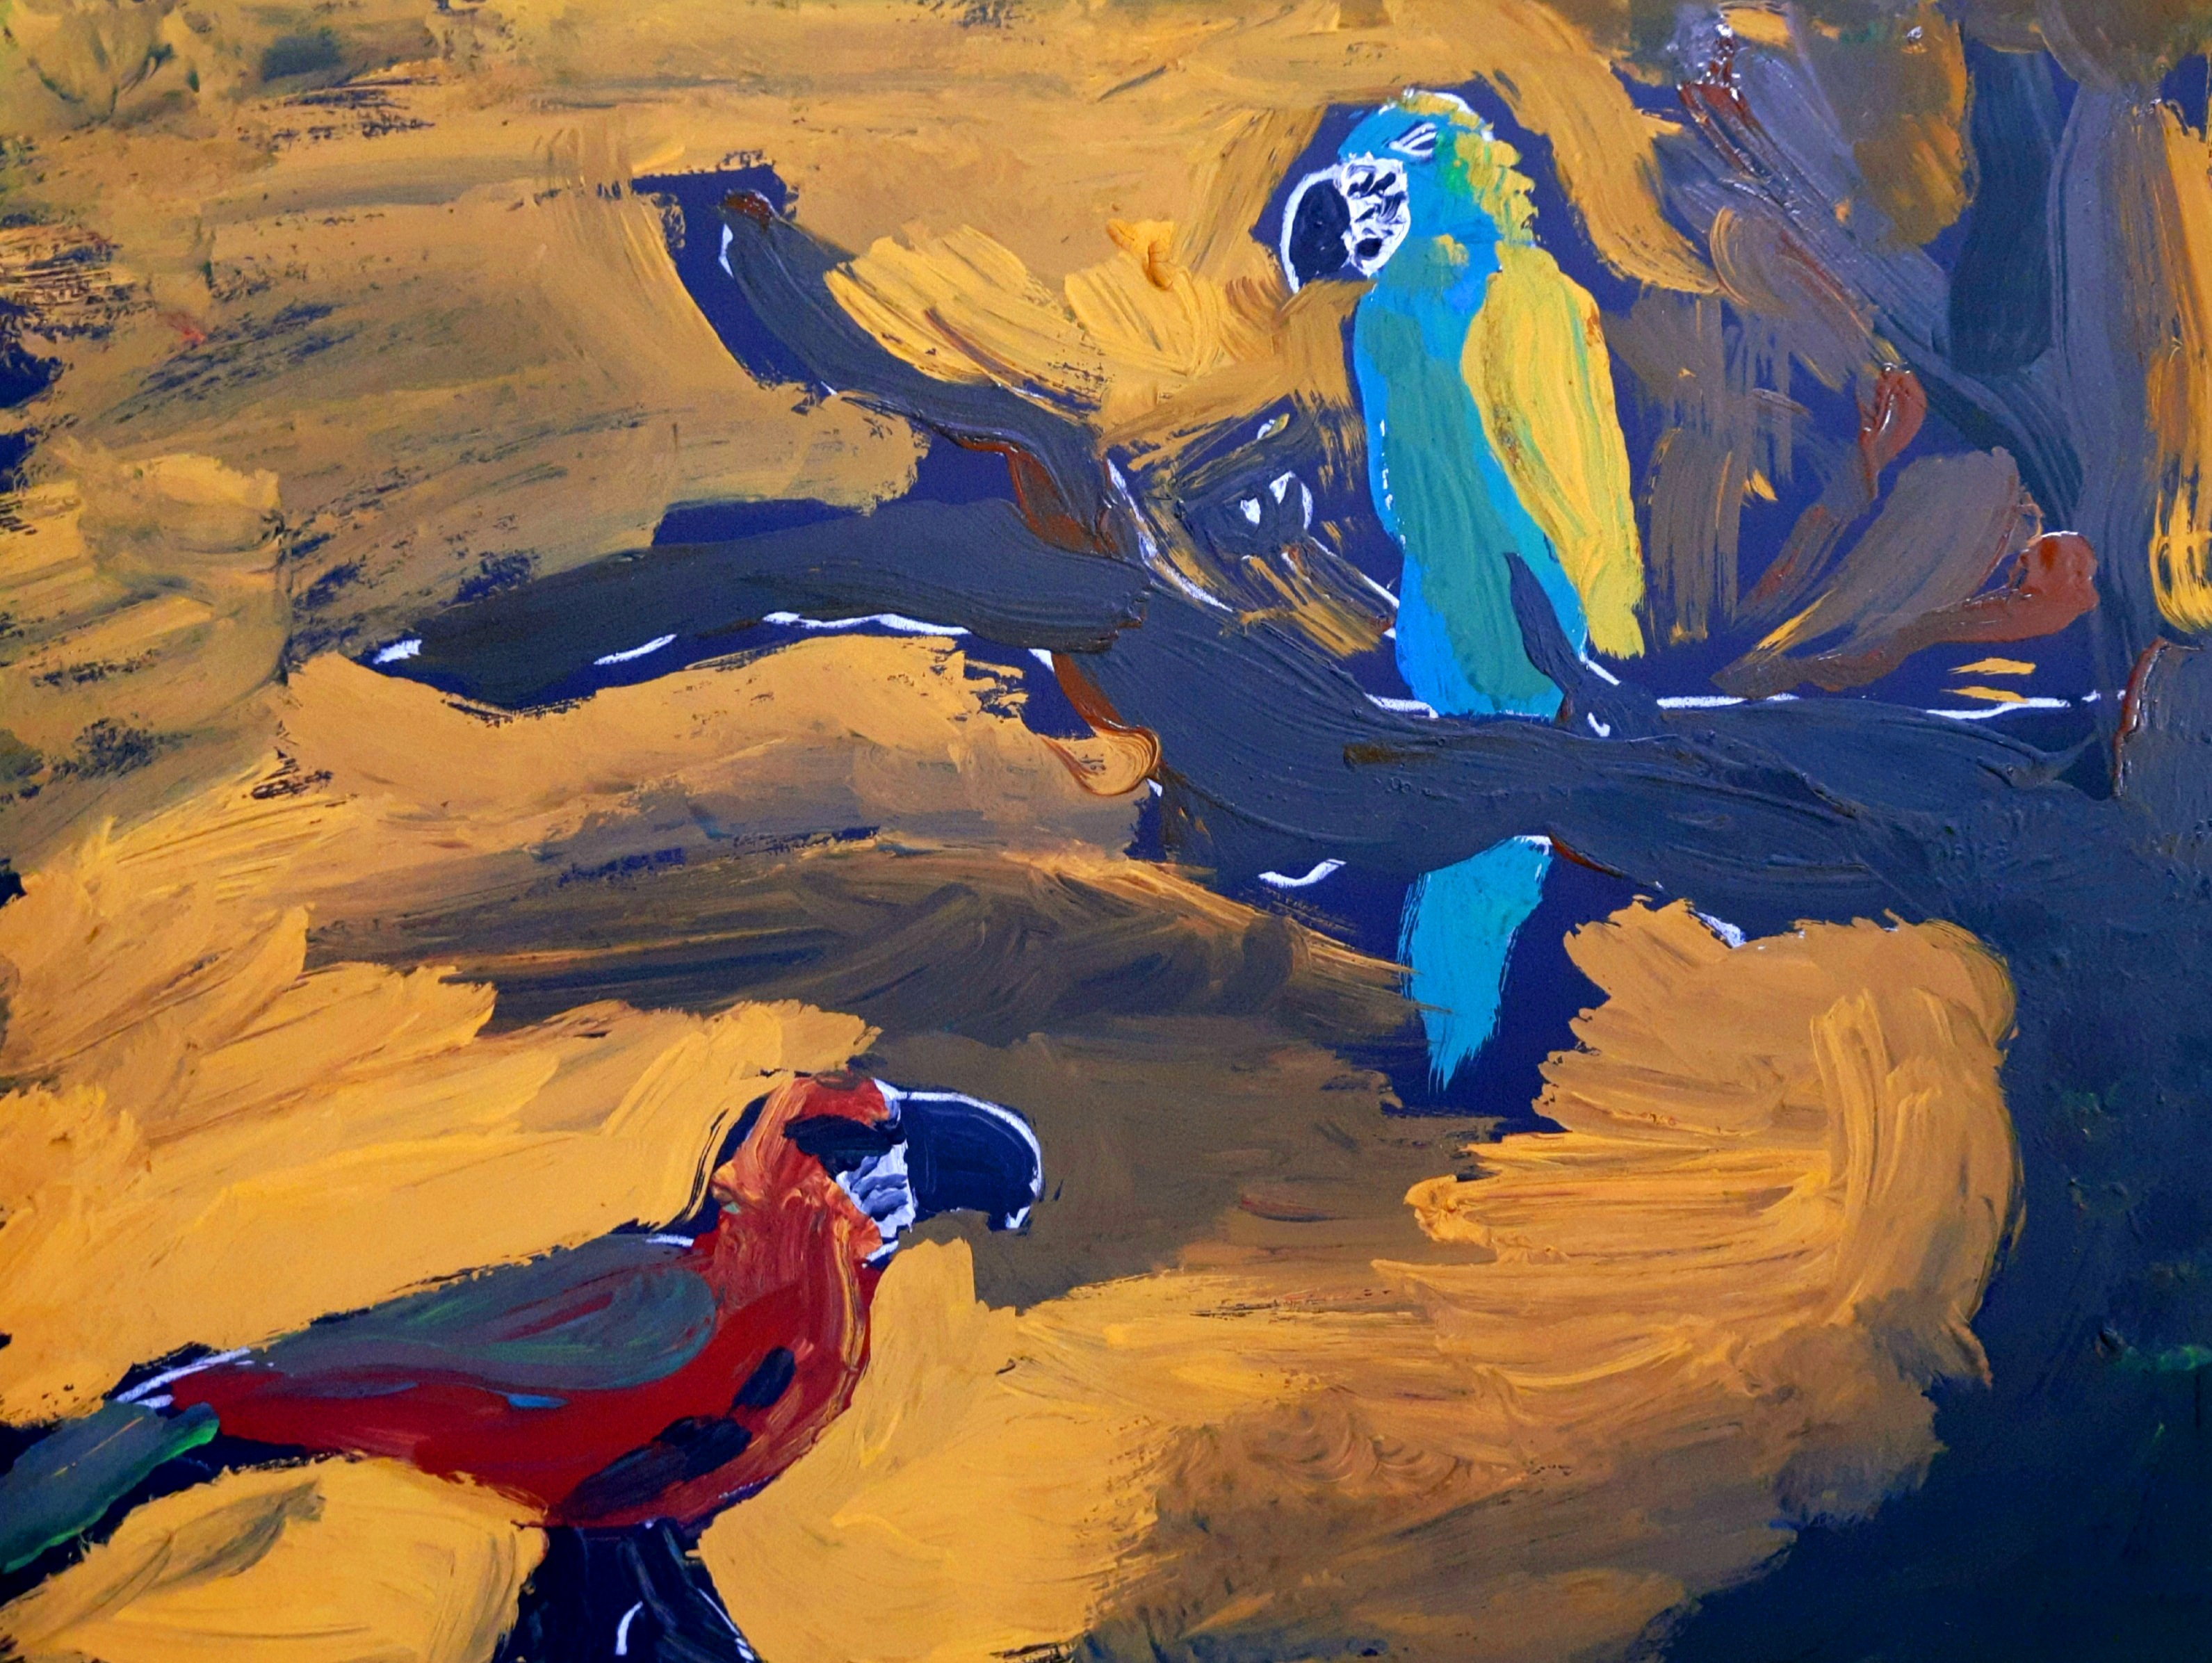 Image shows a child's painting of two macaws - one blue and one red - and a tree branch against a yellow sky.